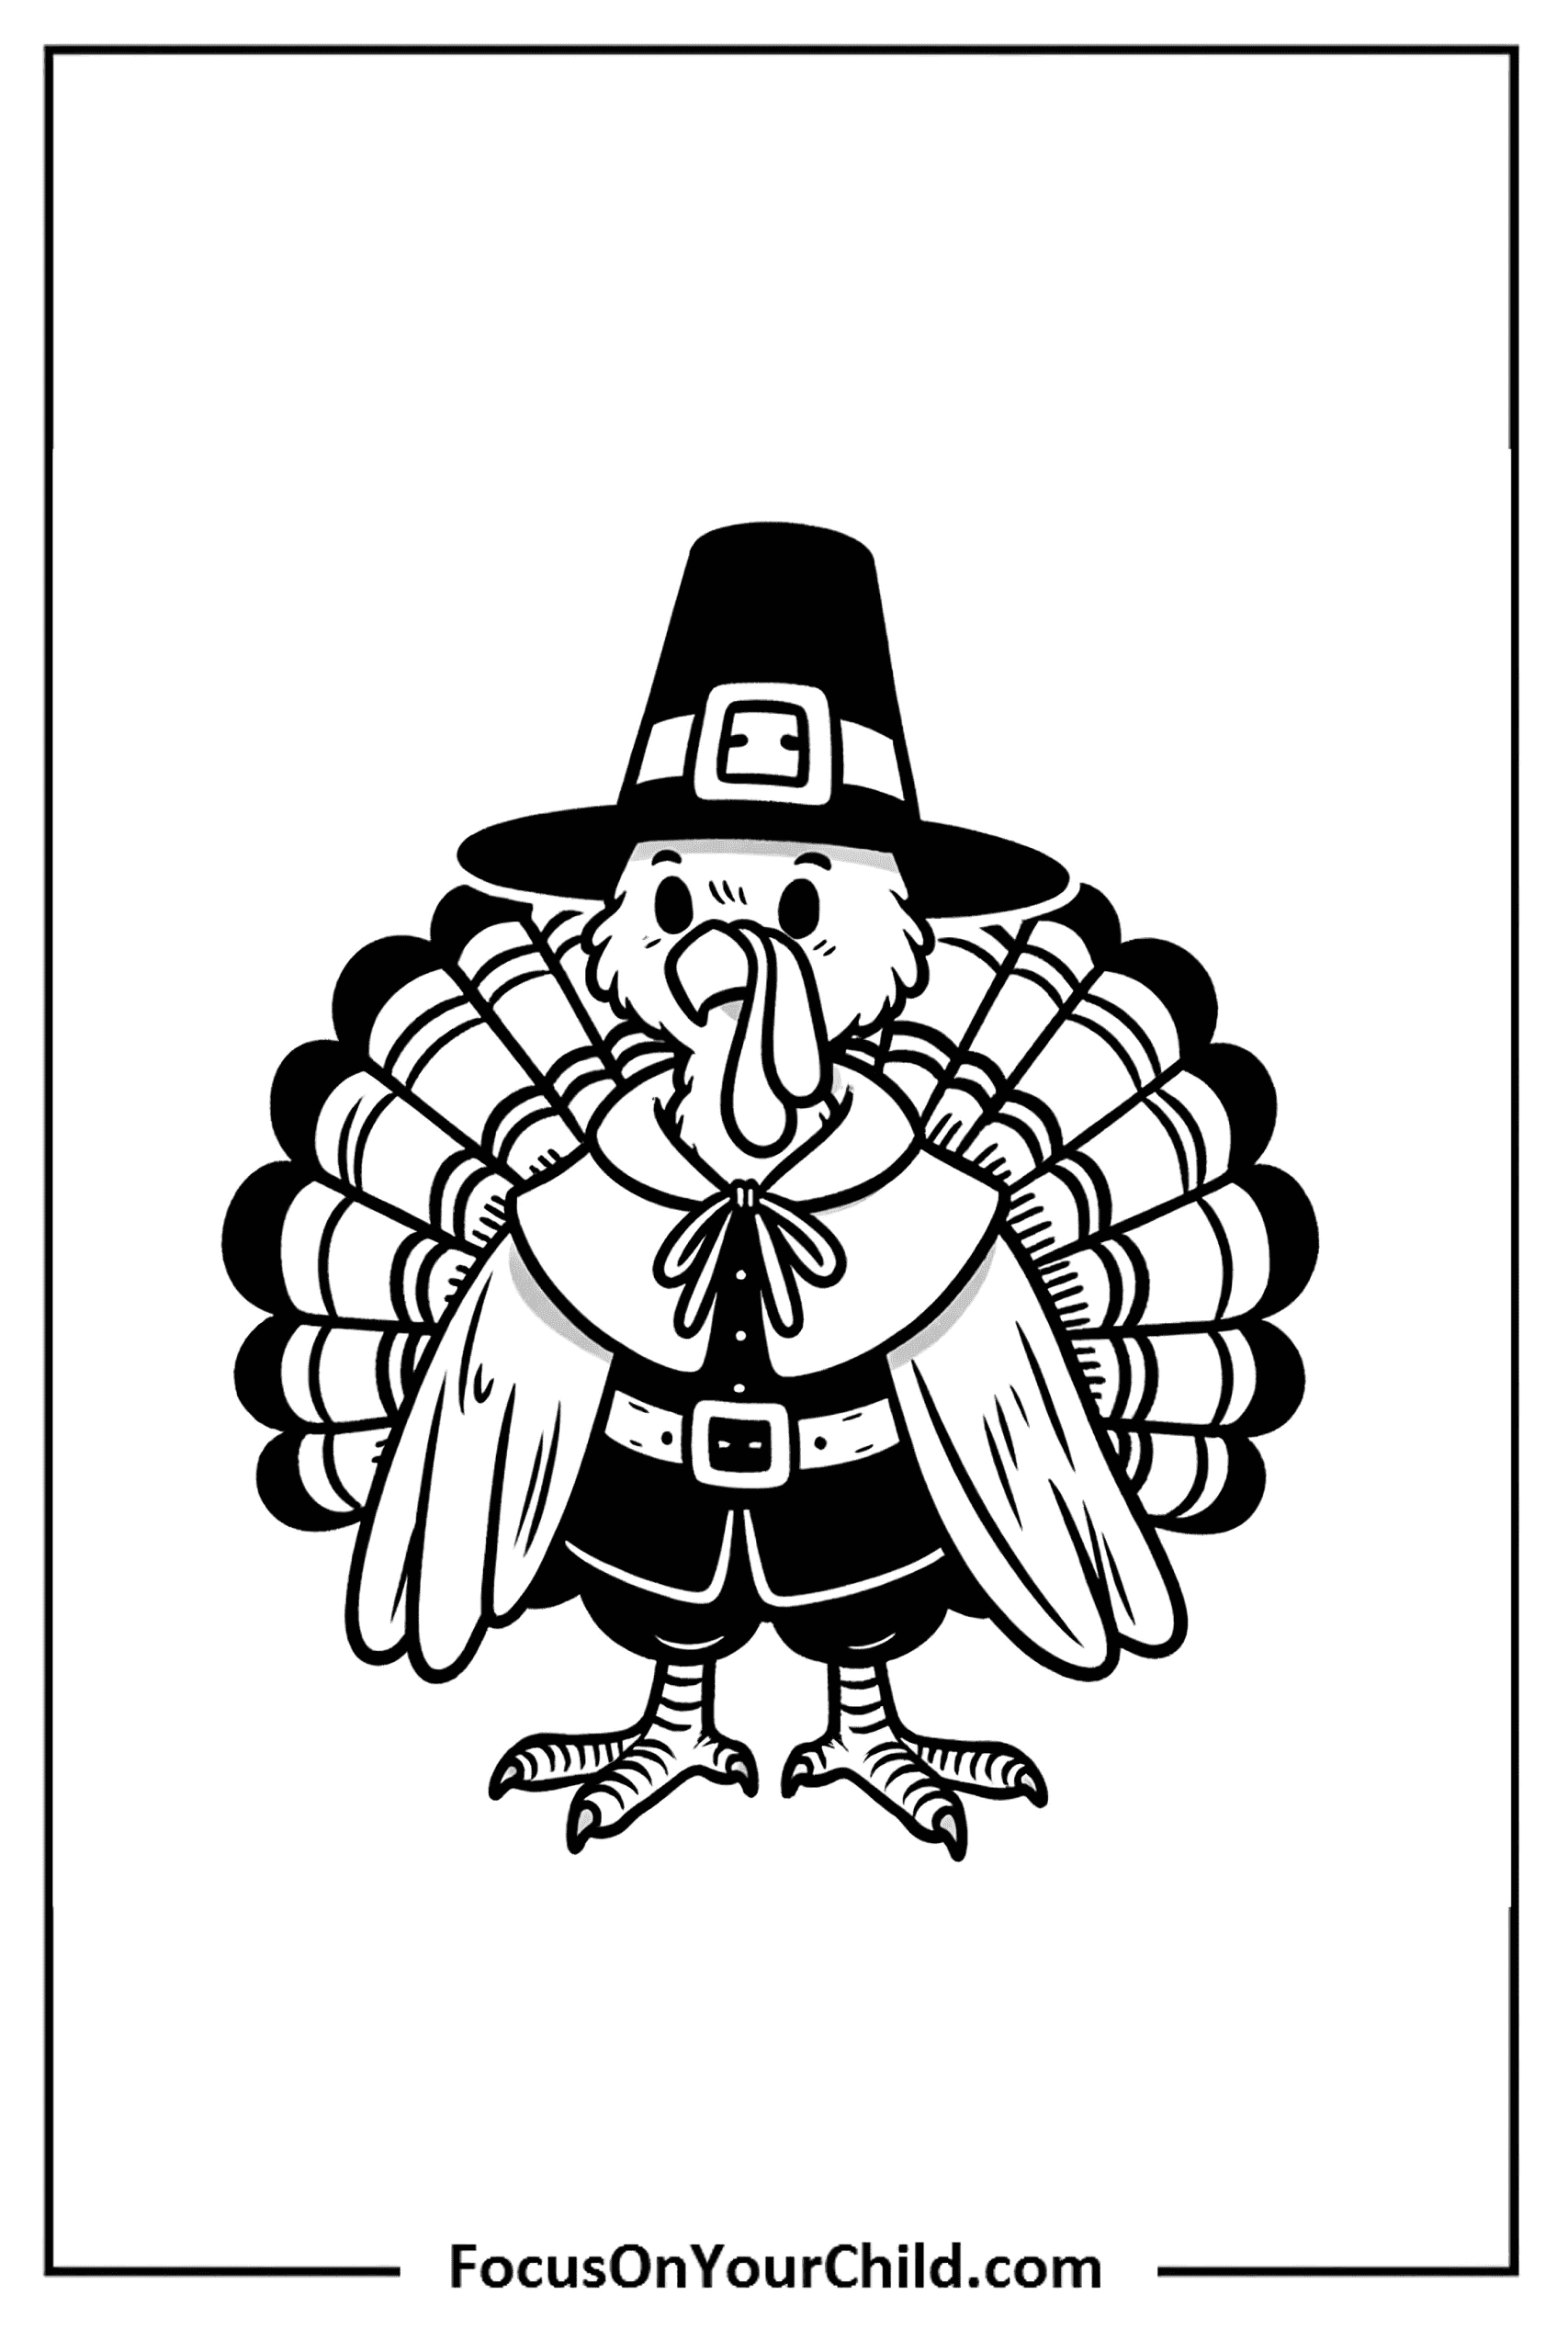 Traditional Pilgrim outfit on a turkey illustration for coloring, FocusOnYourChild.com.